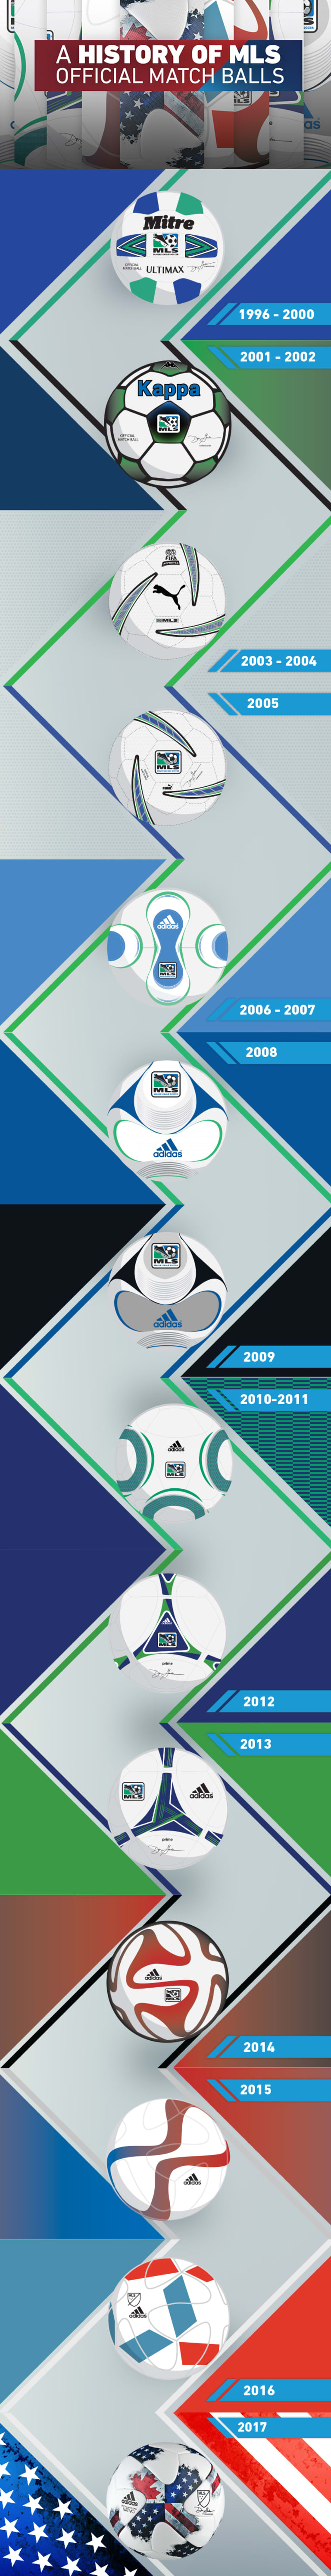 This infographic on the history of MLS match balls will make you nostalgic for the good ol’ days | INSIDER - https://league-mp7static.mlsdigital.net/images/History-of-Ball-infographic-4.jpeg?null